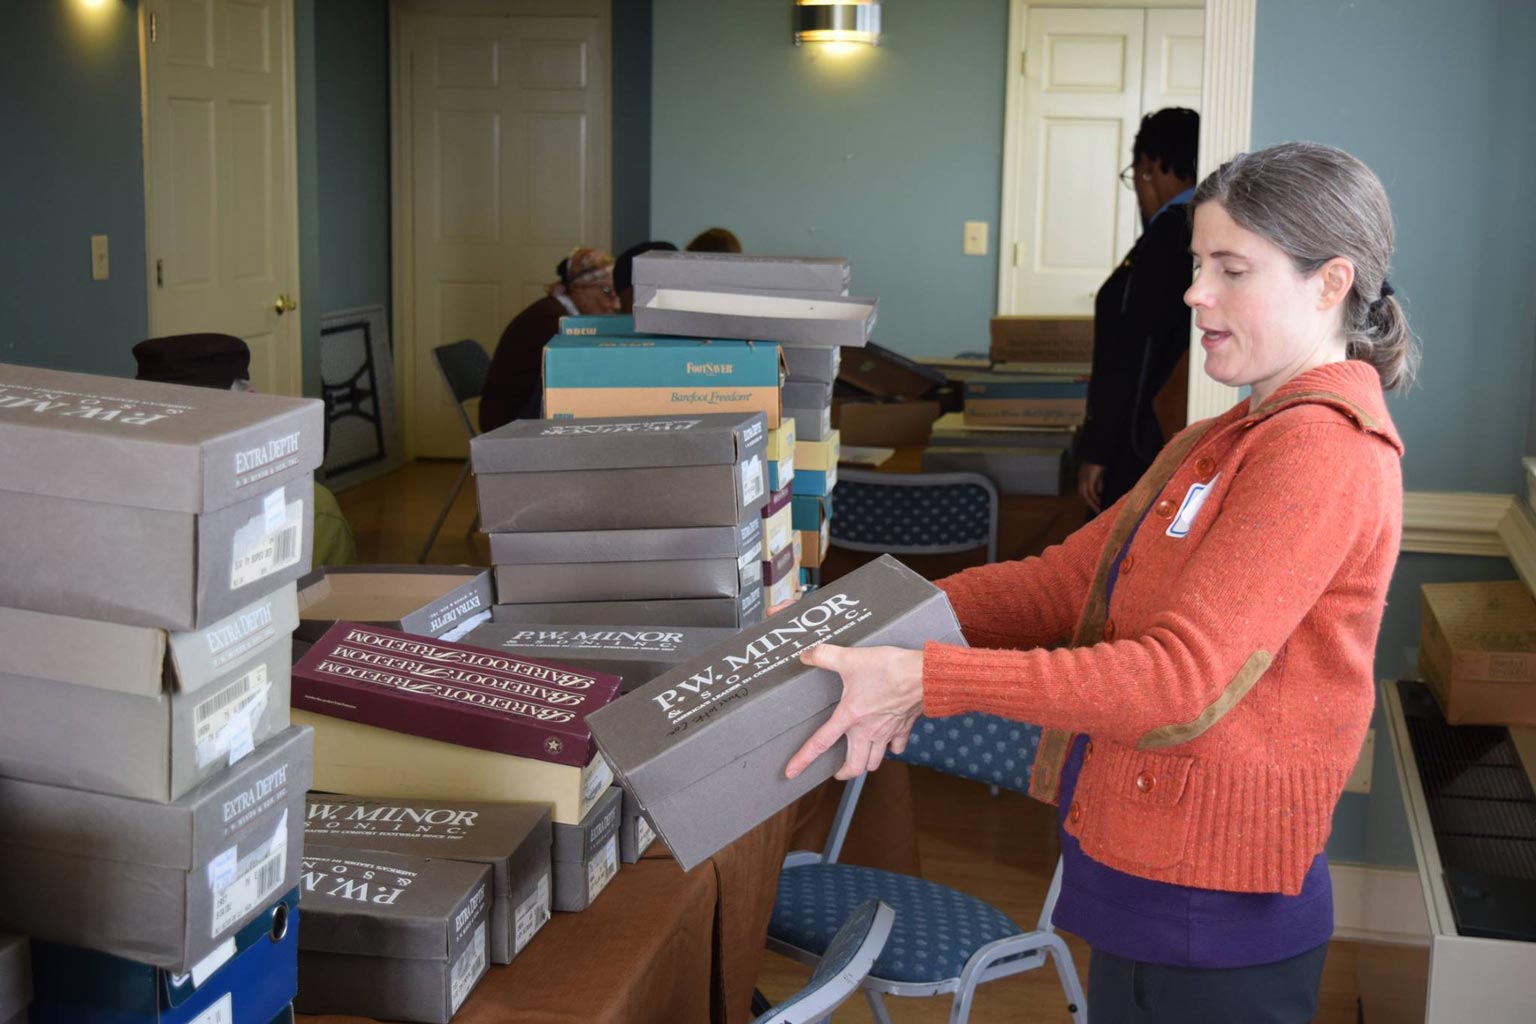 Volunteer Teresa Savarino helped distribute orthopedic shoes to Regency House residents at a special pop-up market. Iona received close to 300 pairs of shoes from Public Shoe Store in Arlington.